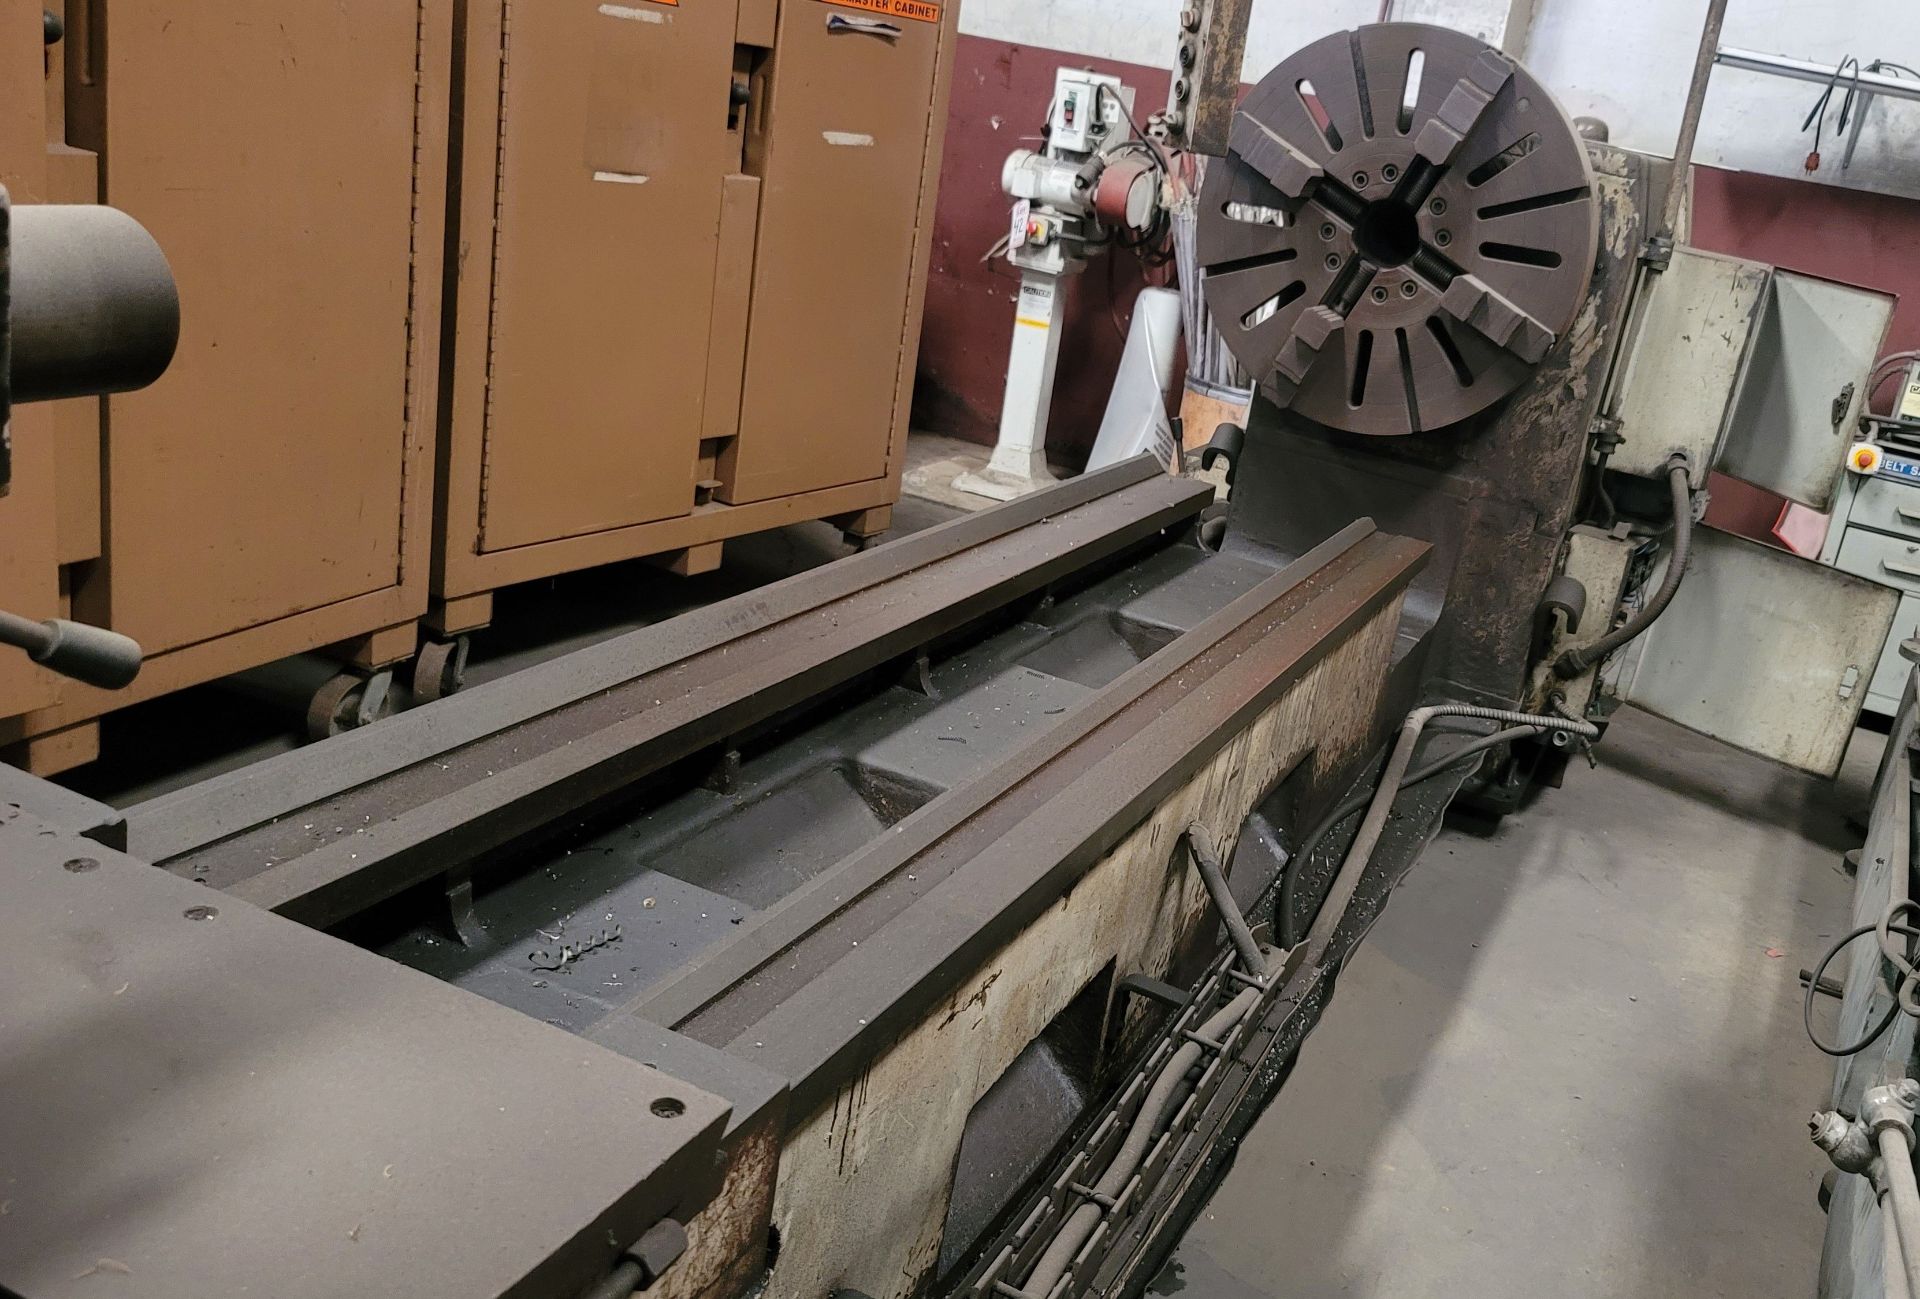 CADILLAC GAP BED ENGINE LATHE, MODEL 32120, 32" X 120", 42" SWING IN GAP, TAILSTOCK, S/N 267014 - Image 8 of 10